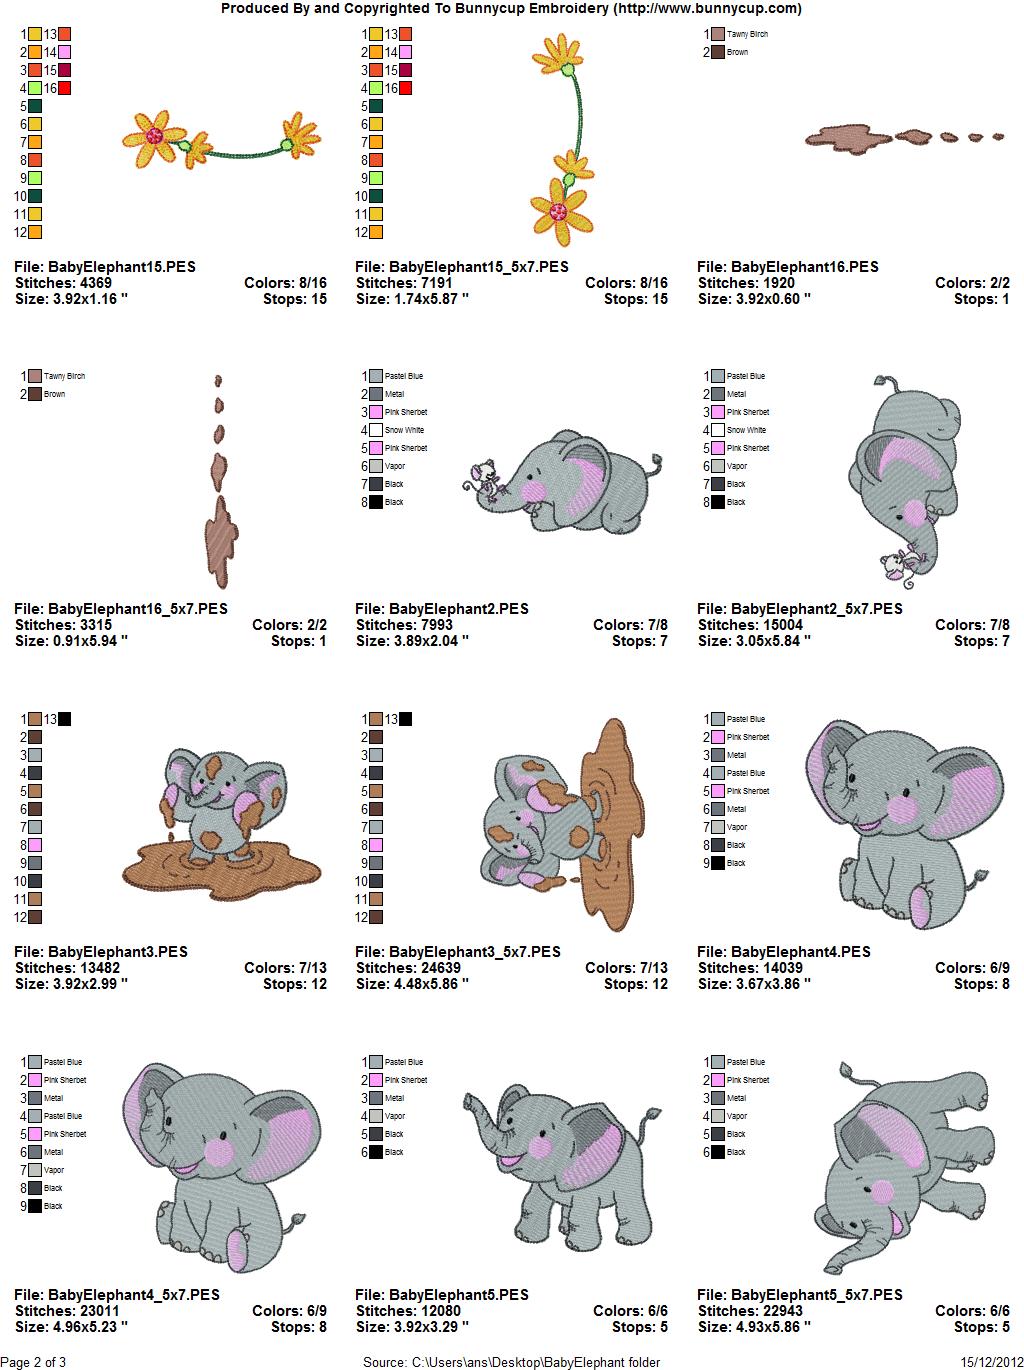 Baby Elephant Embroidery Designs Bunnycup Embroidery,Kitchen Design Ideas Galley Style